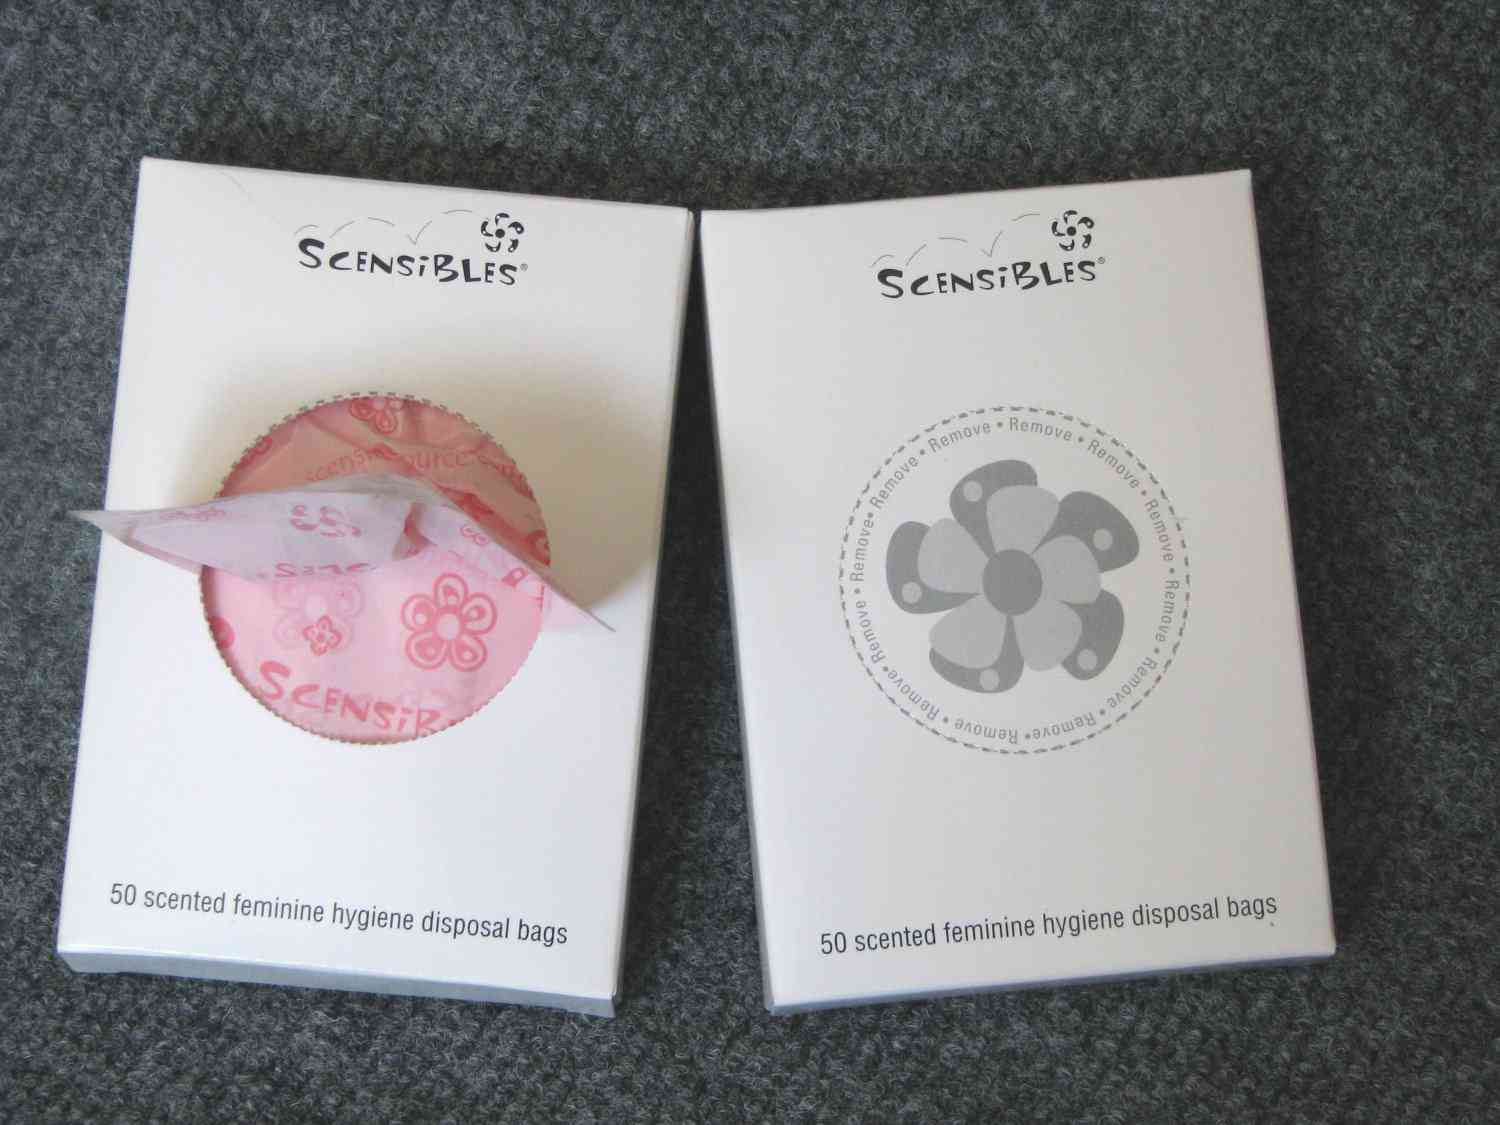 Scensibles Personal Disposal Bags for Sanitary Pads and Tampons